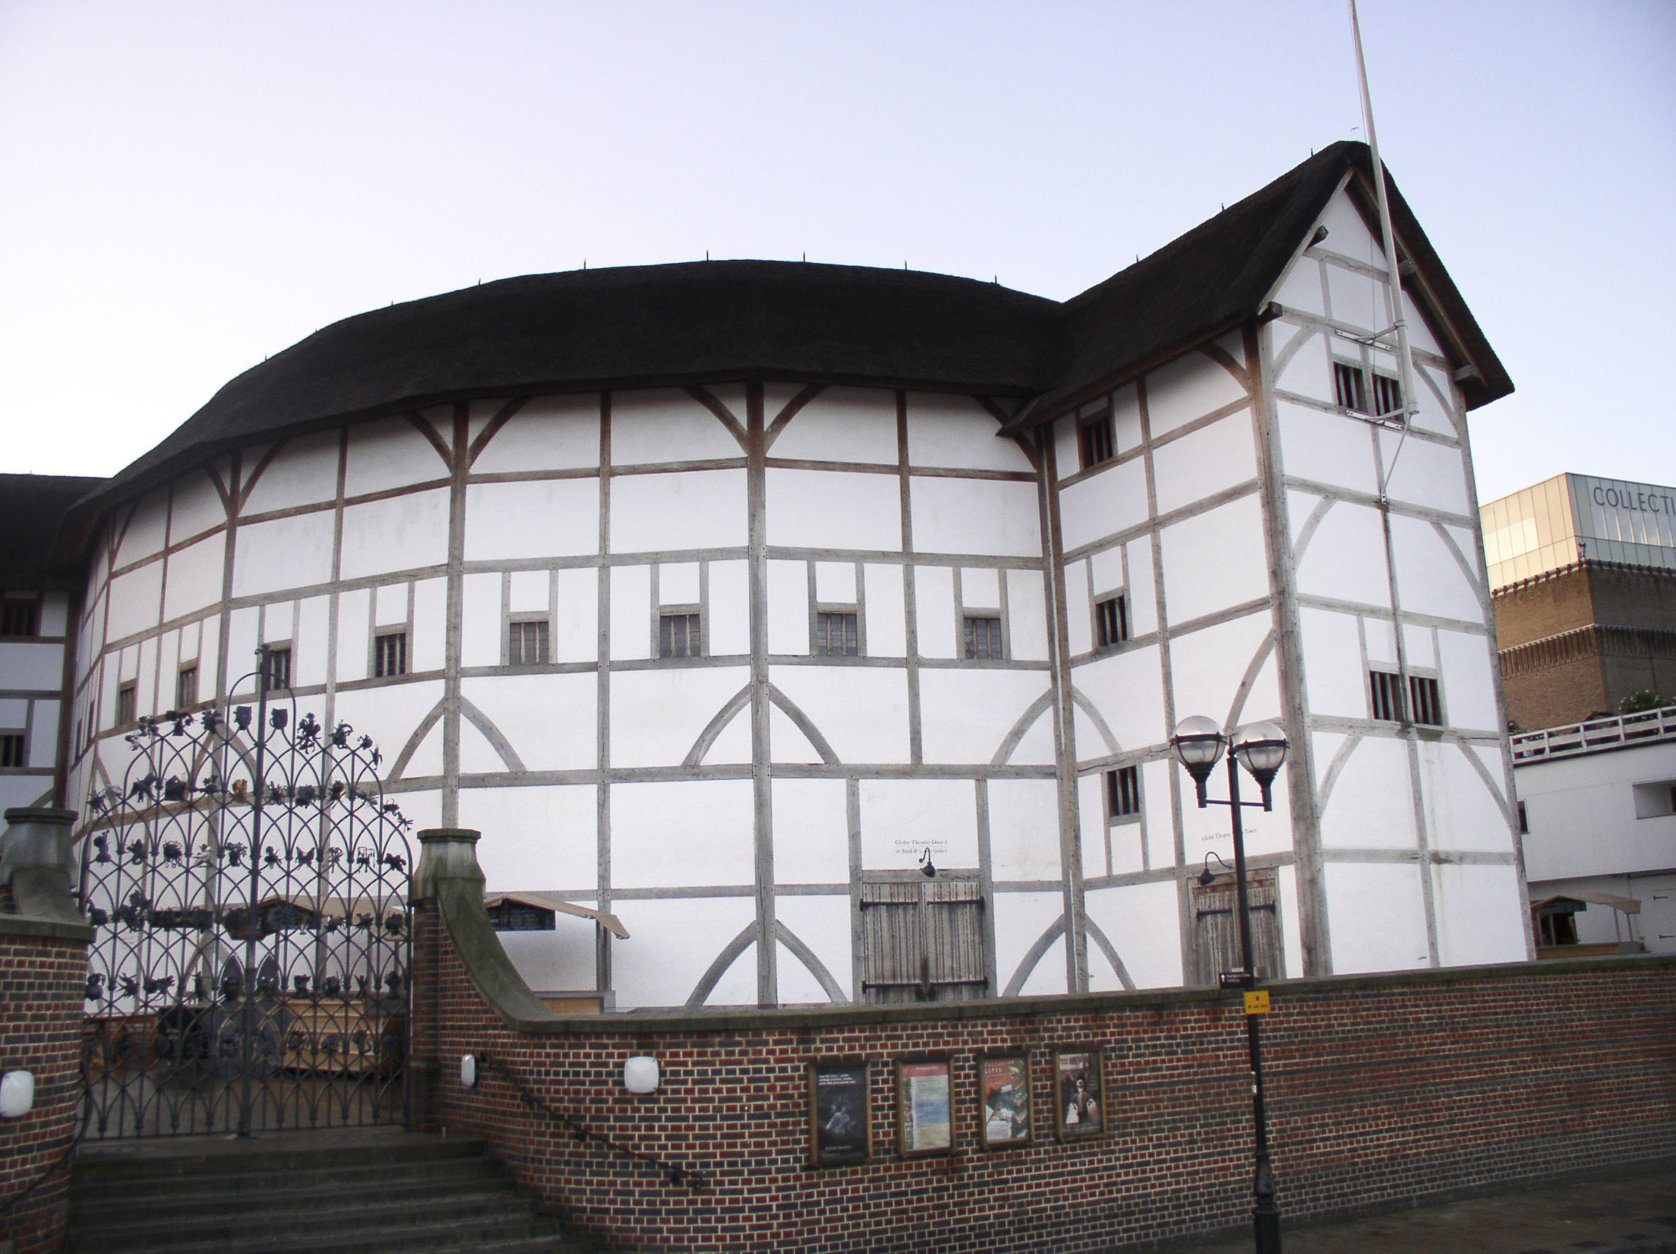 The reconstructed Globe on the south bank of the Thames in London, a wonderful place to visit.